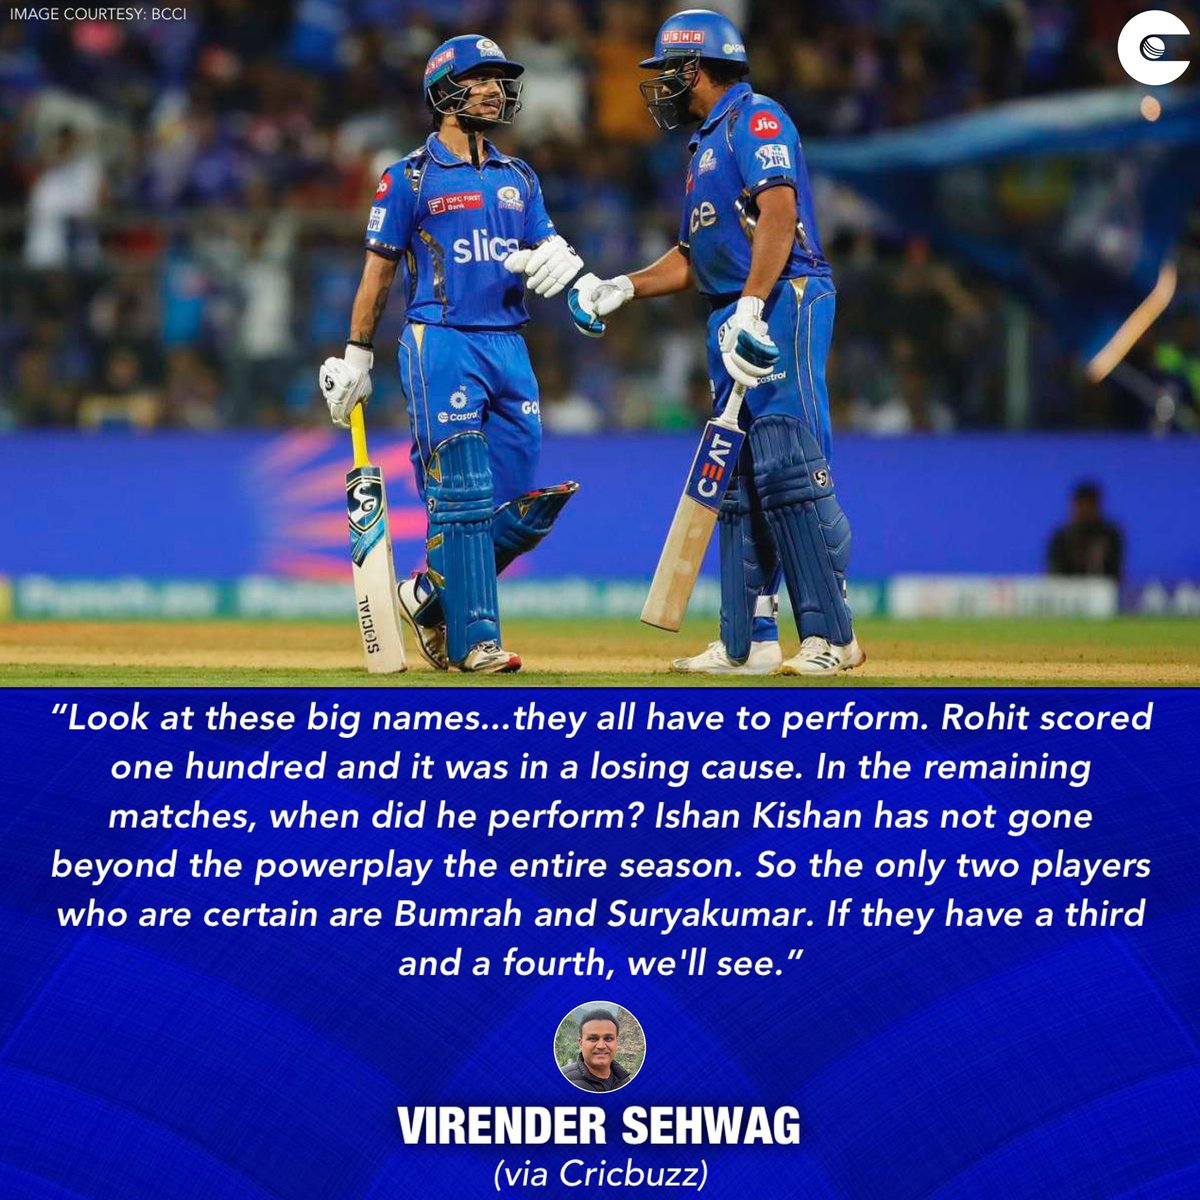 #VirenderSehwag casts a doubt on the retention of #IshanKishan and #RohitSharma for #MumbaiIndians.

#IPL2024 #IPL #MI